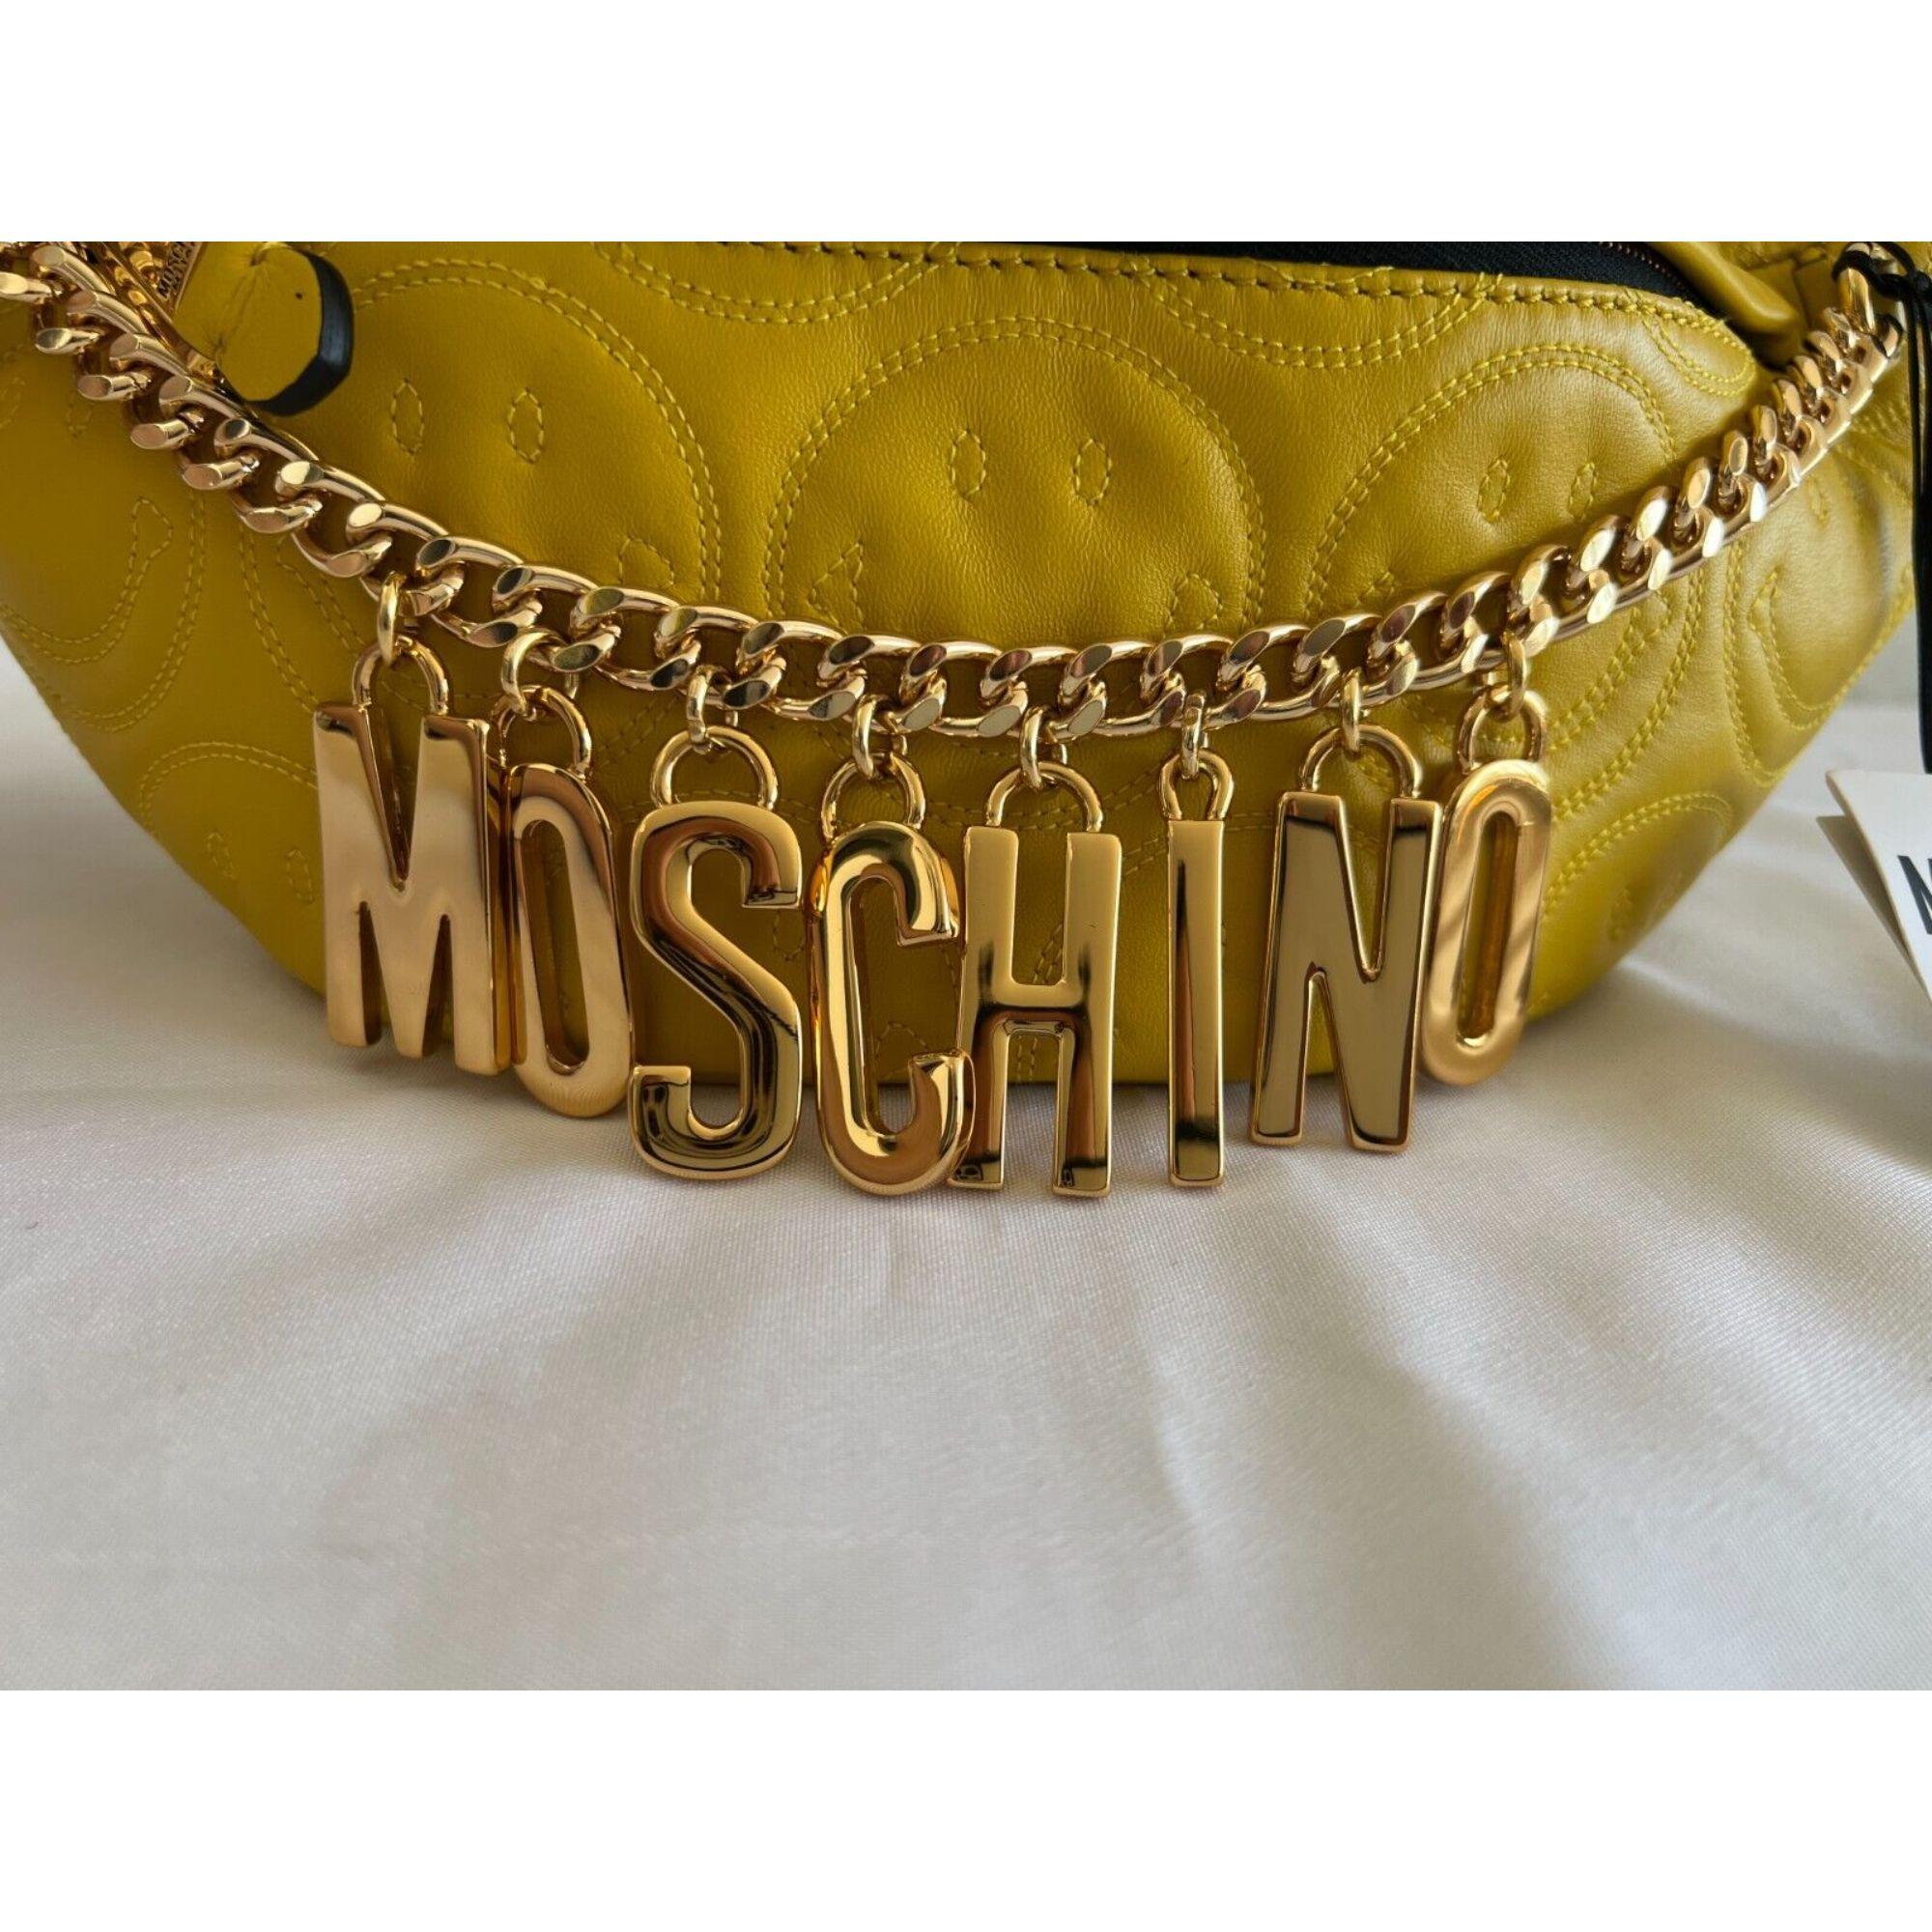 SS21 Moschino Couture Yellow Fanny Pack with Engraved Smiley by Jeremy Scott For Sale 8